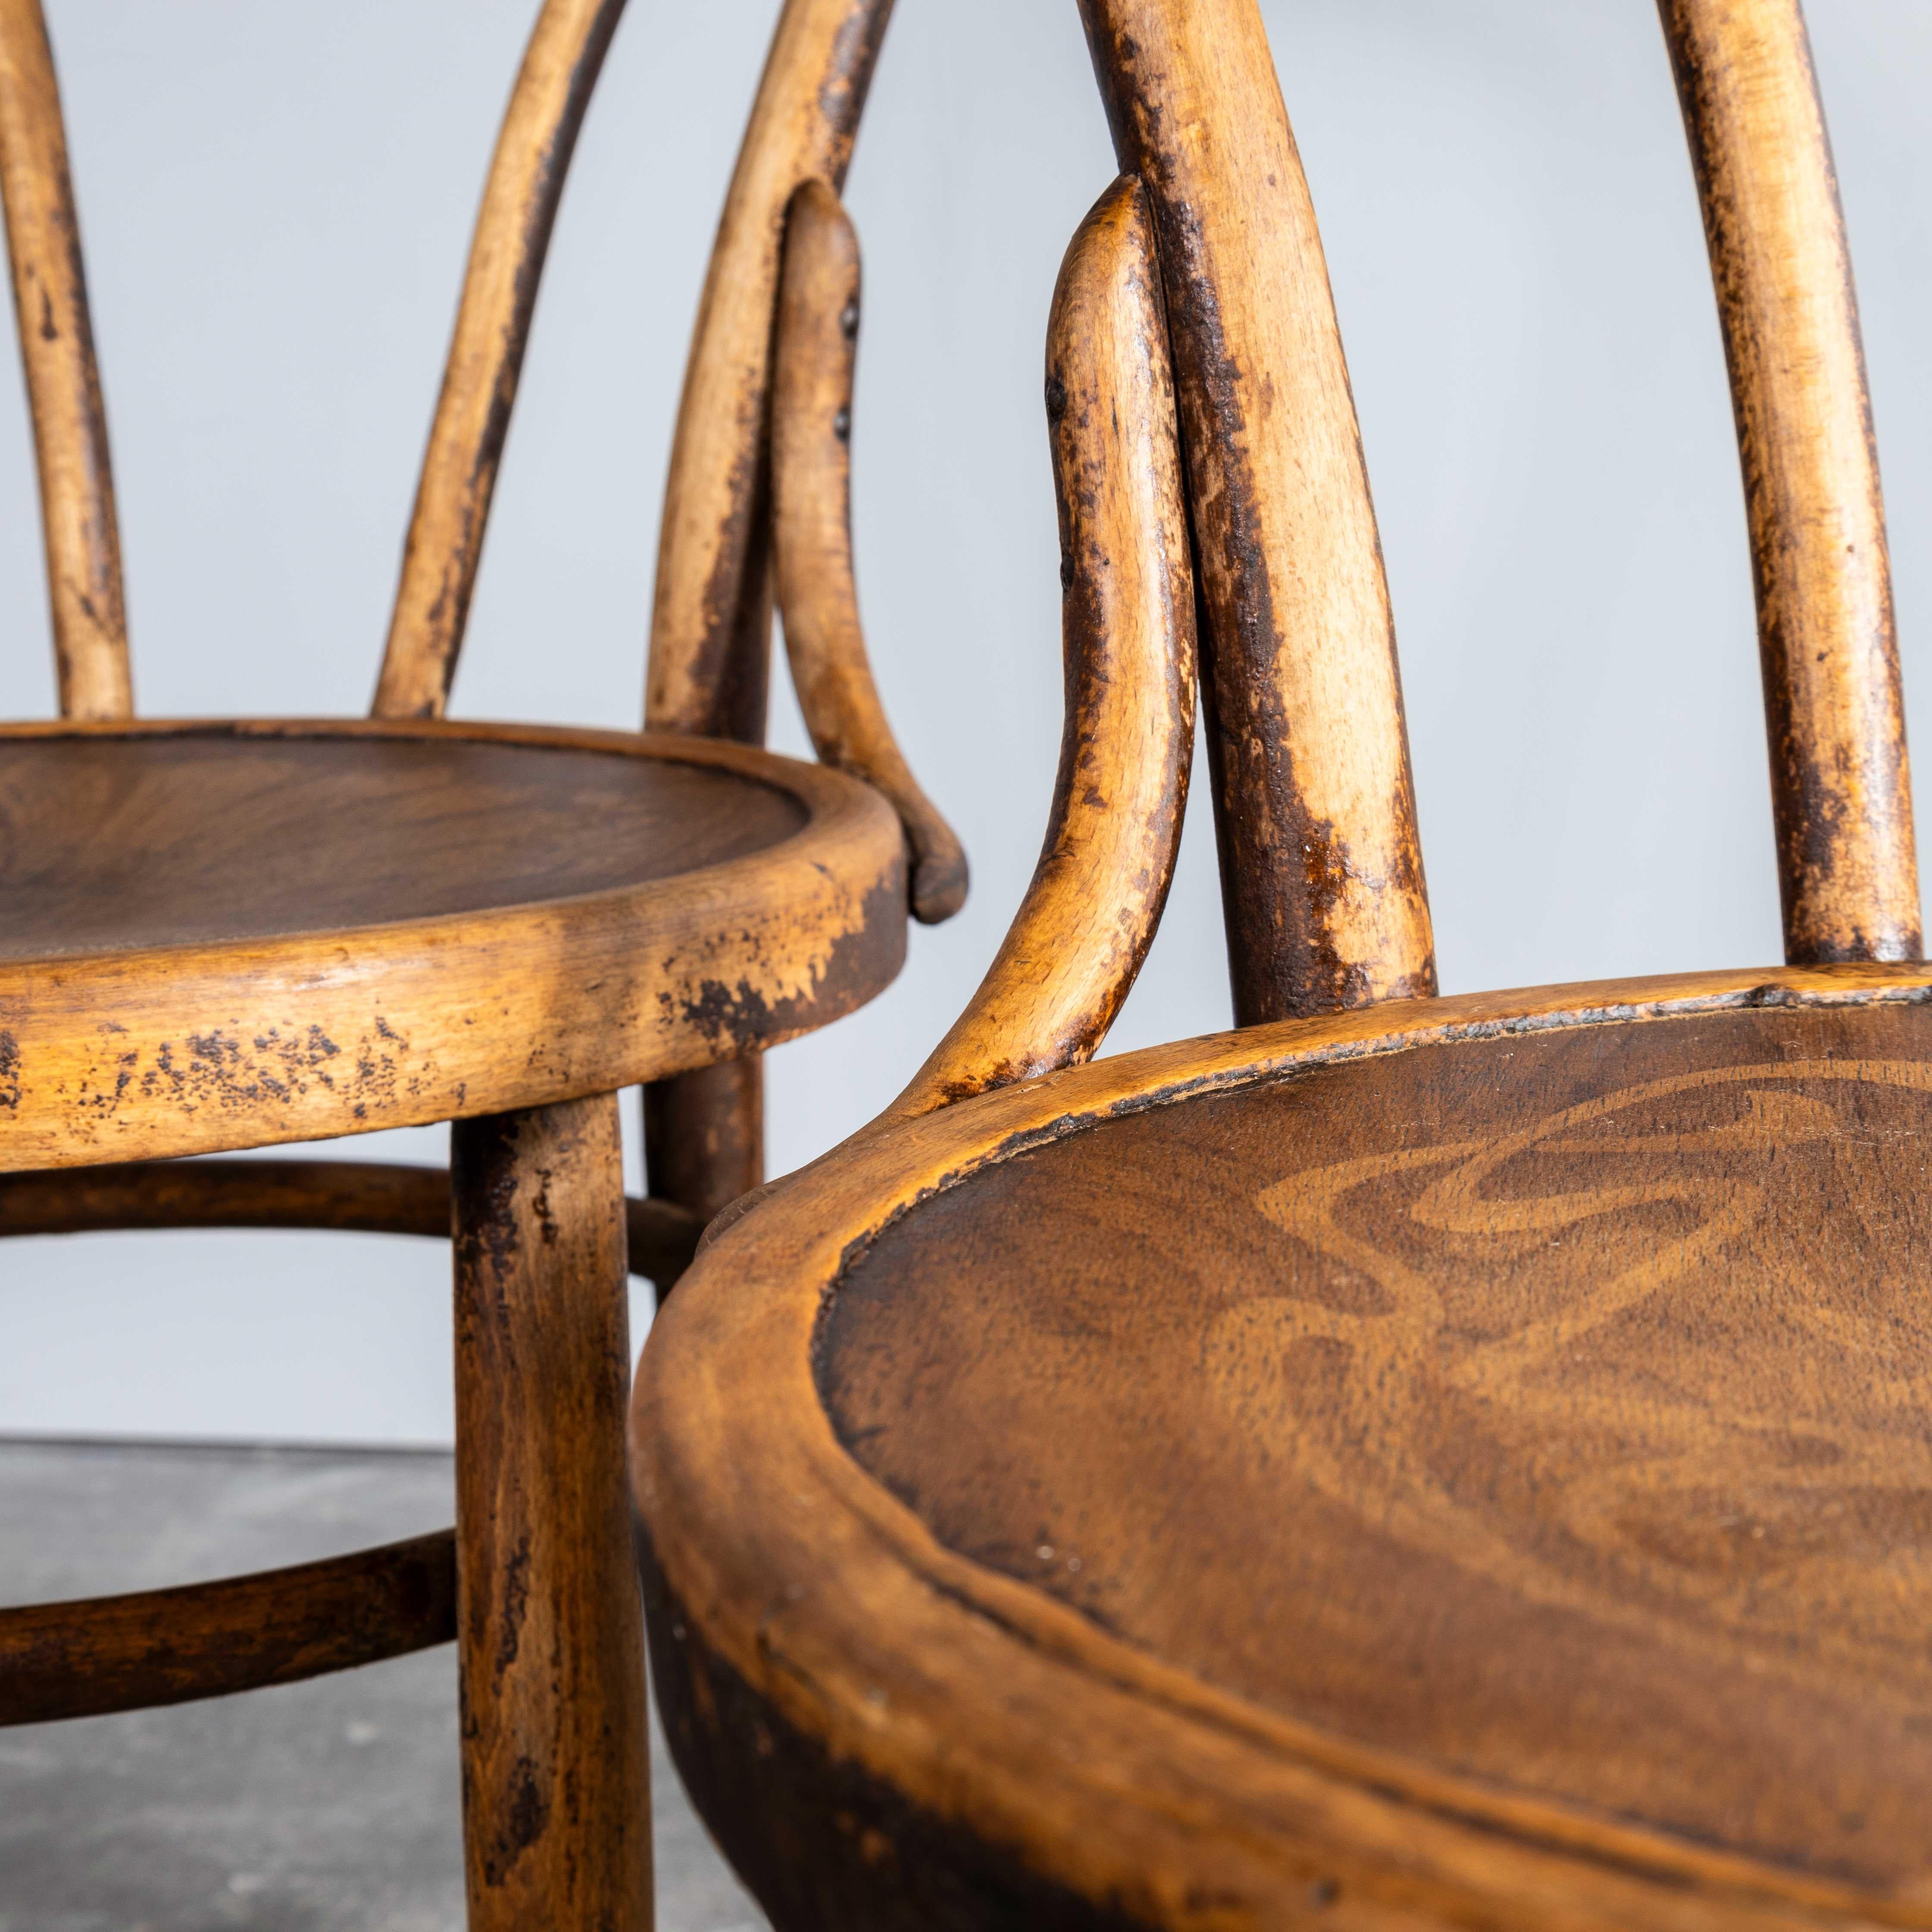 1940’s Bentwood Debrecen Single Hoop Dining Chairs – Pair
1940’s Bentwood Debrecen Single Hoop Dining Chairs – Pair. Debrecen produced chairs in various factories throughout Eastern Europe. Stunning hoop back chairs with stamped decorated seats and